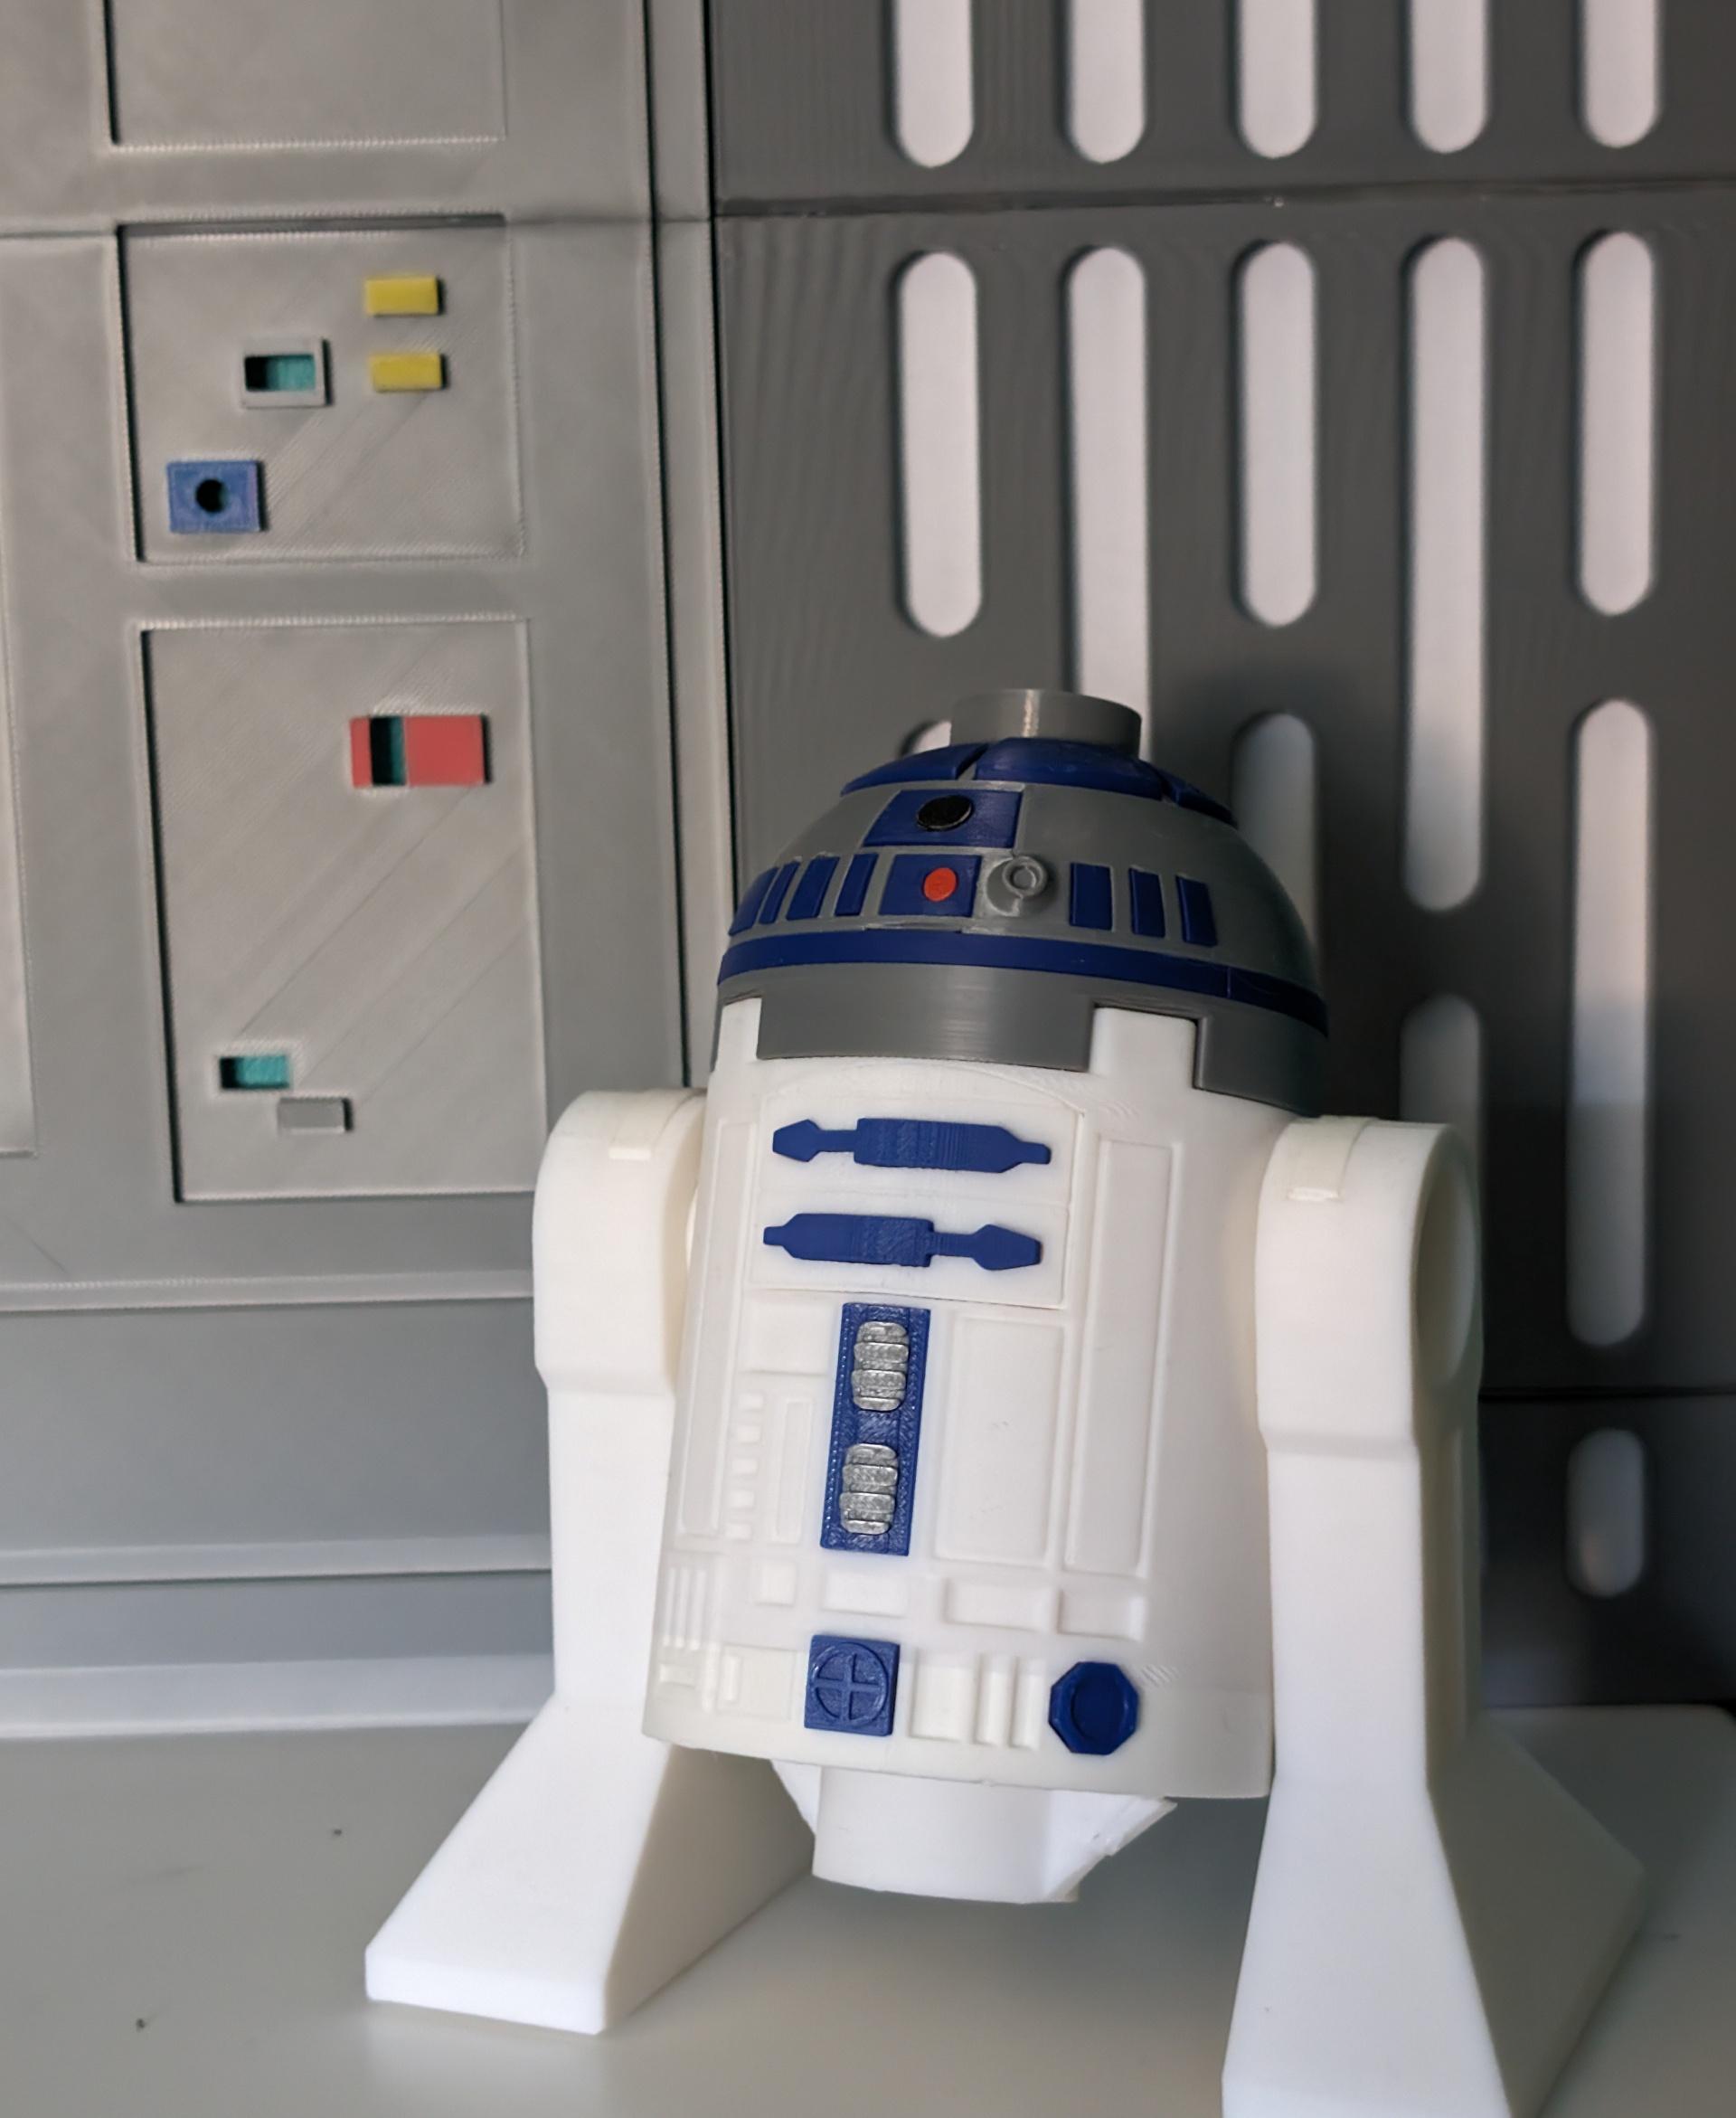 R2-D2 (6 inch brick figure, NO MMU/AMS, NO supports, NO glue) - Beep Boop Beep

First model I printed absolutely amazing. - 3d model